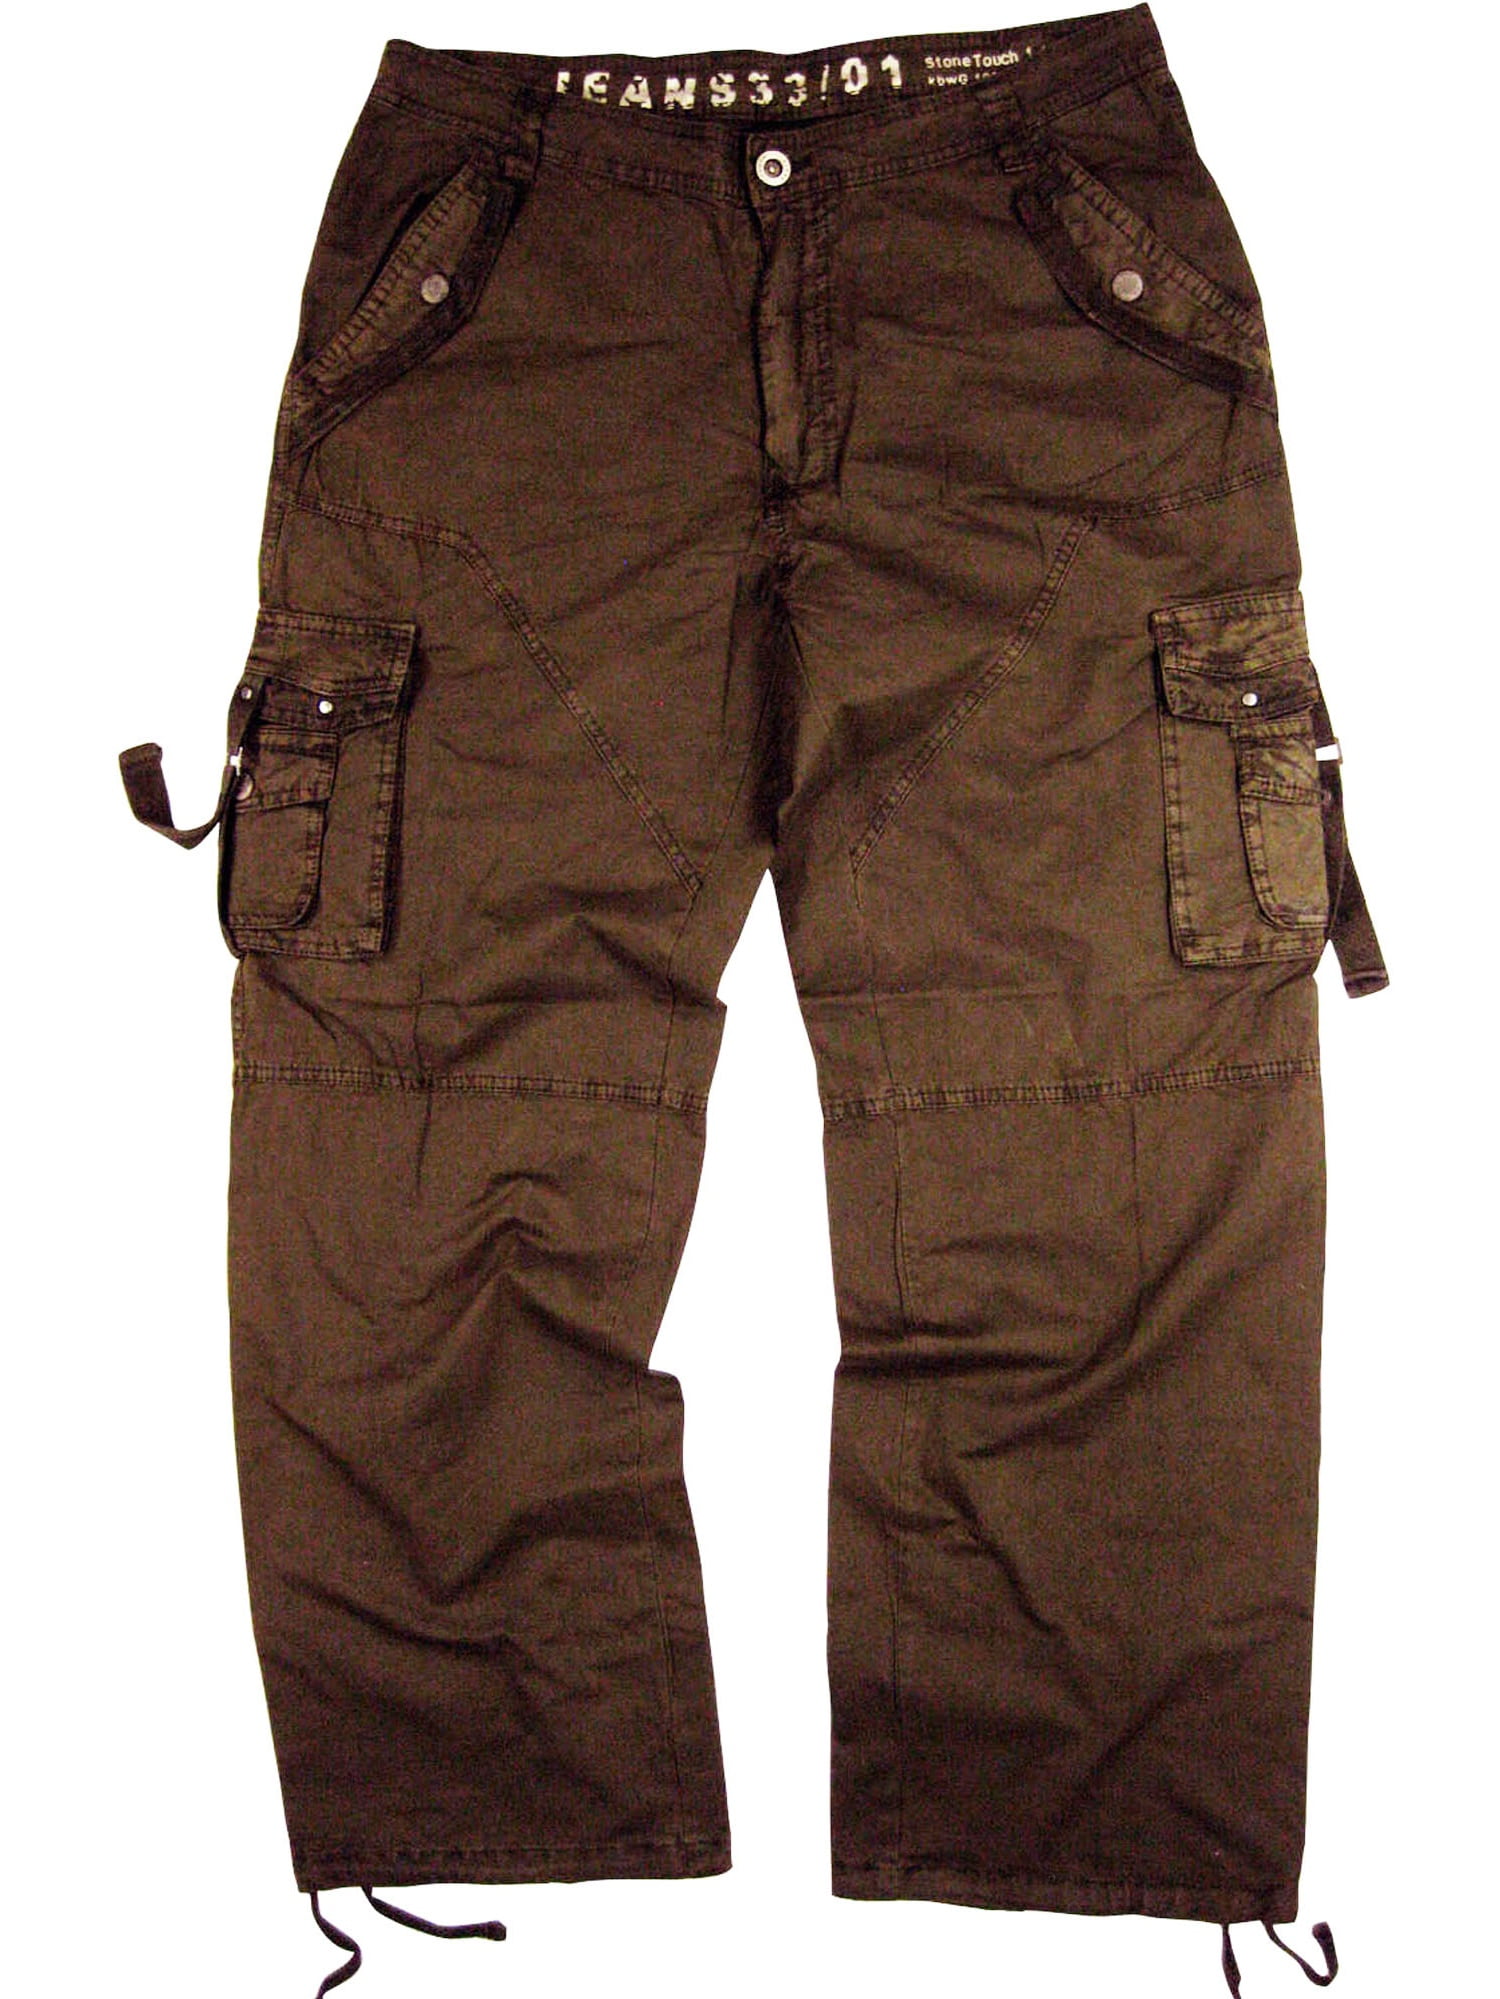 Lutratocro Mens Cargo Casual Rugged Wear Straight Leg Combat Multi Pockets Pants 